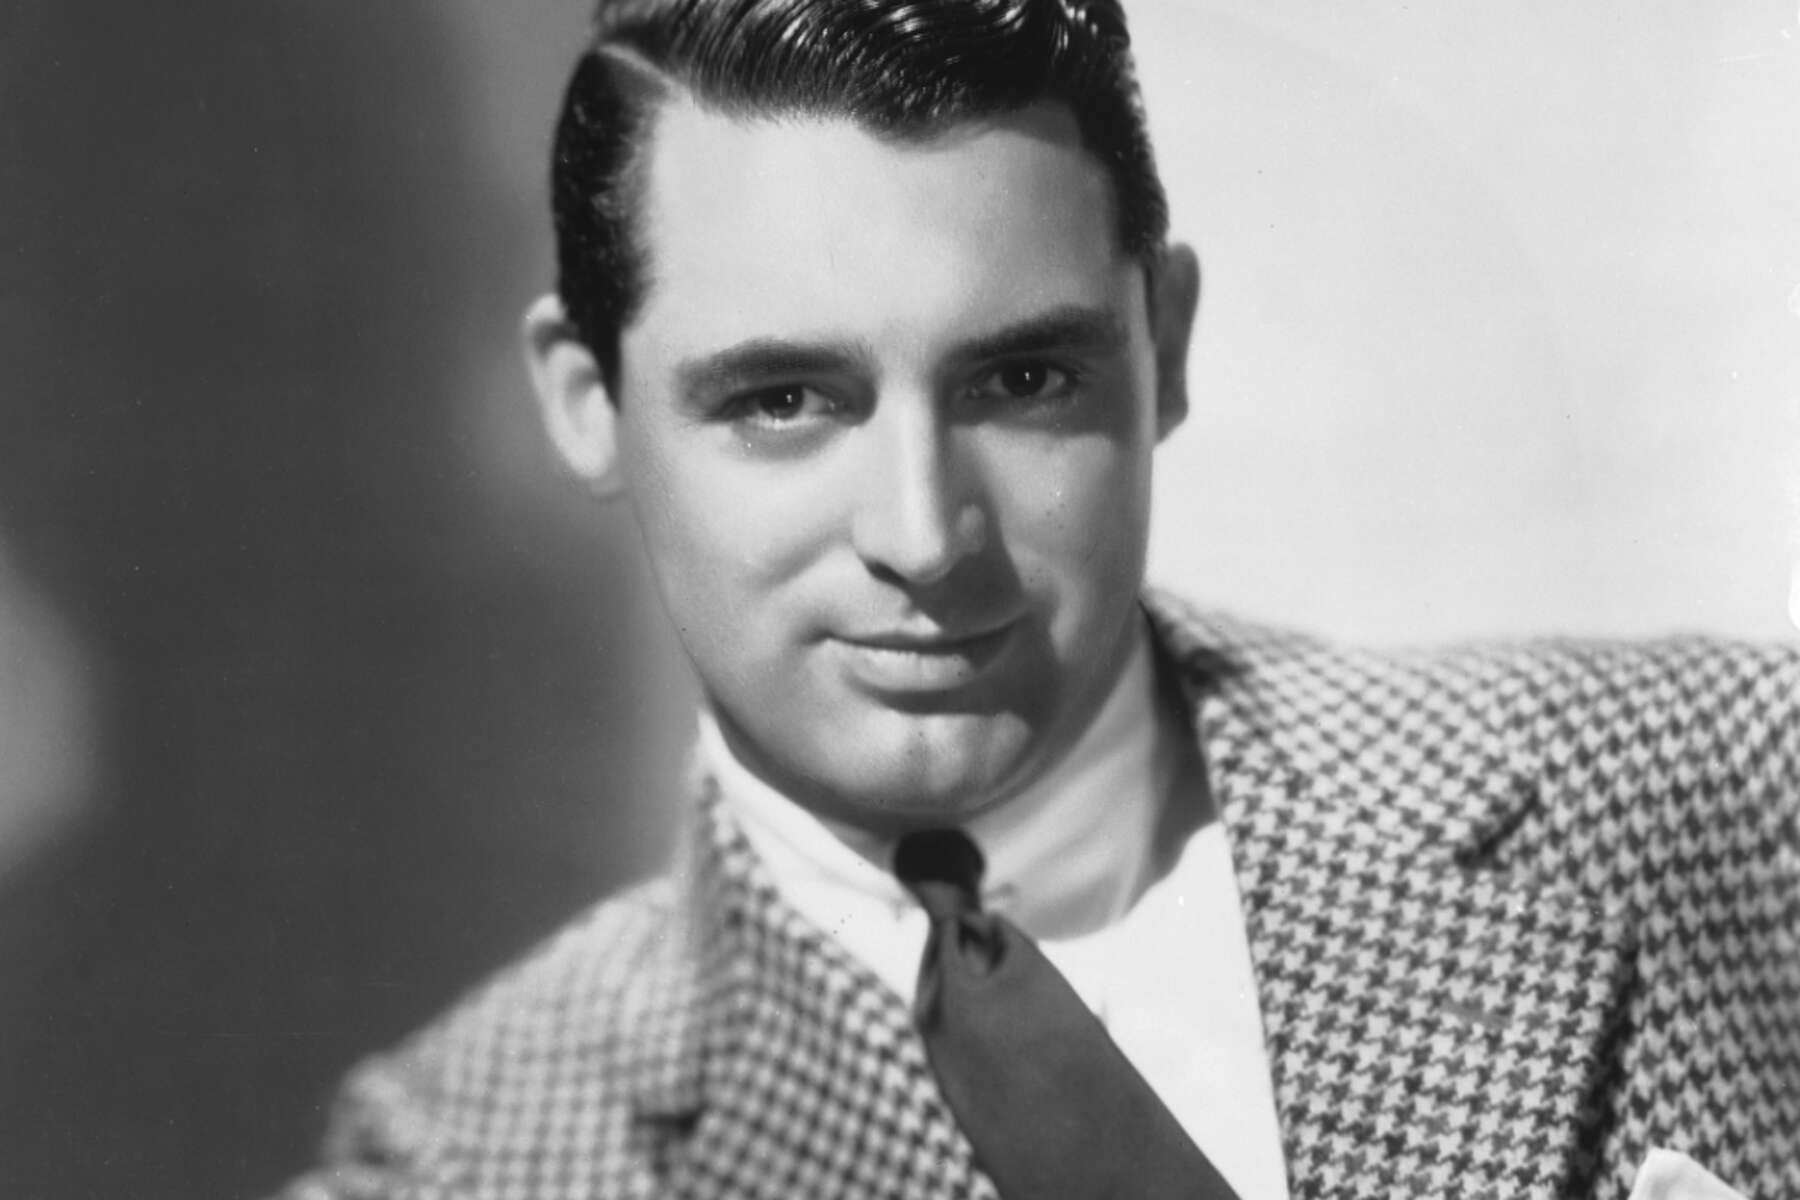 What Plastic Surgery Has Cary Grant Had?